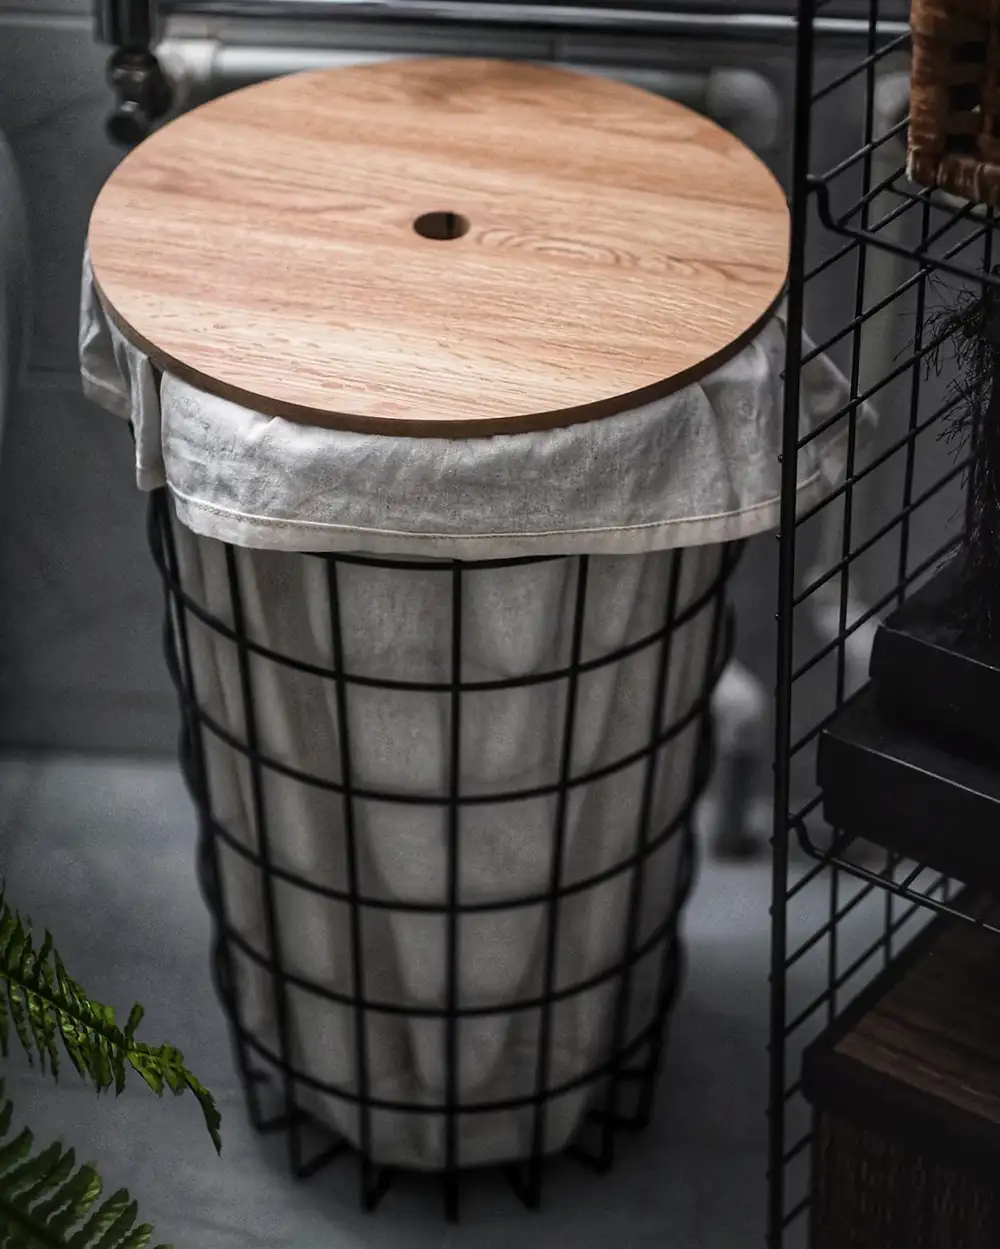 Wired Laundry Basket - Thumbnail